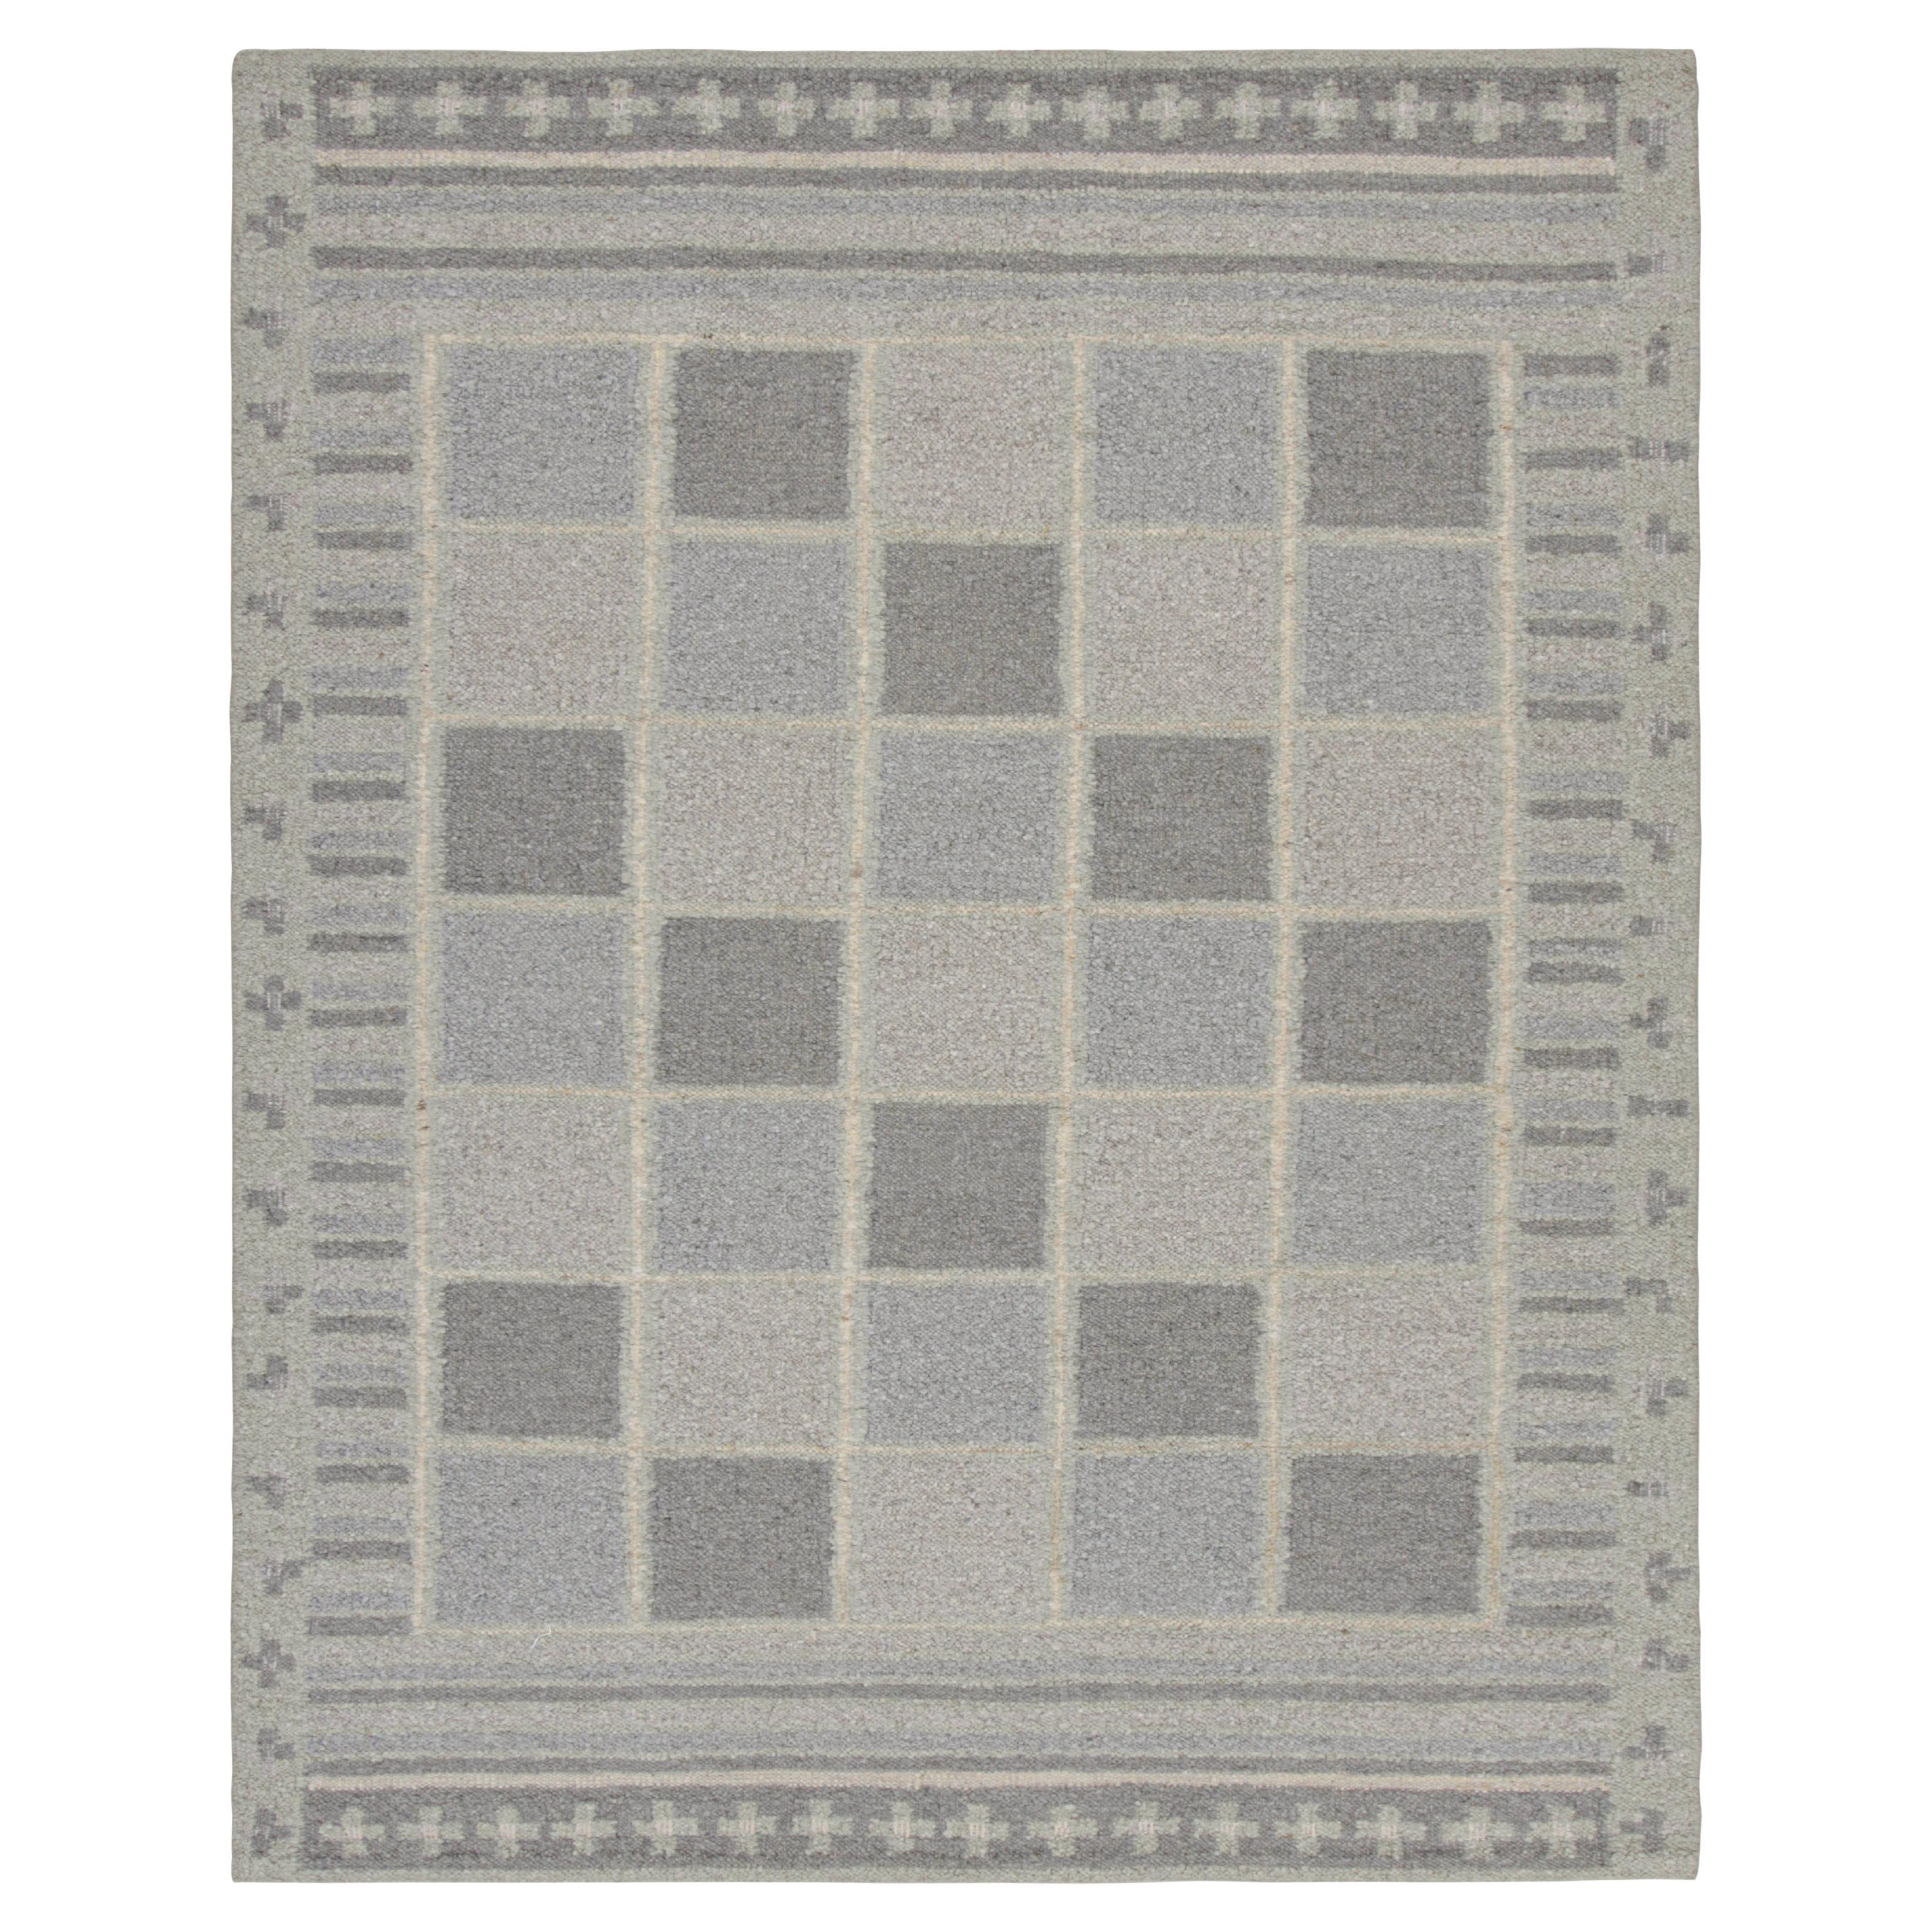 Rug & Kilim’s Scandinavian Style Rug with Gray and Blue Geometric Patterns For Sale